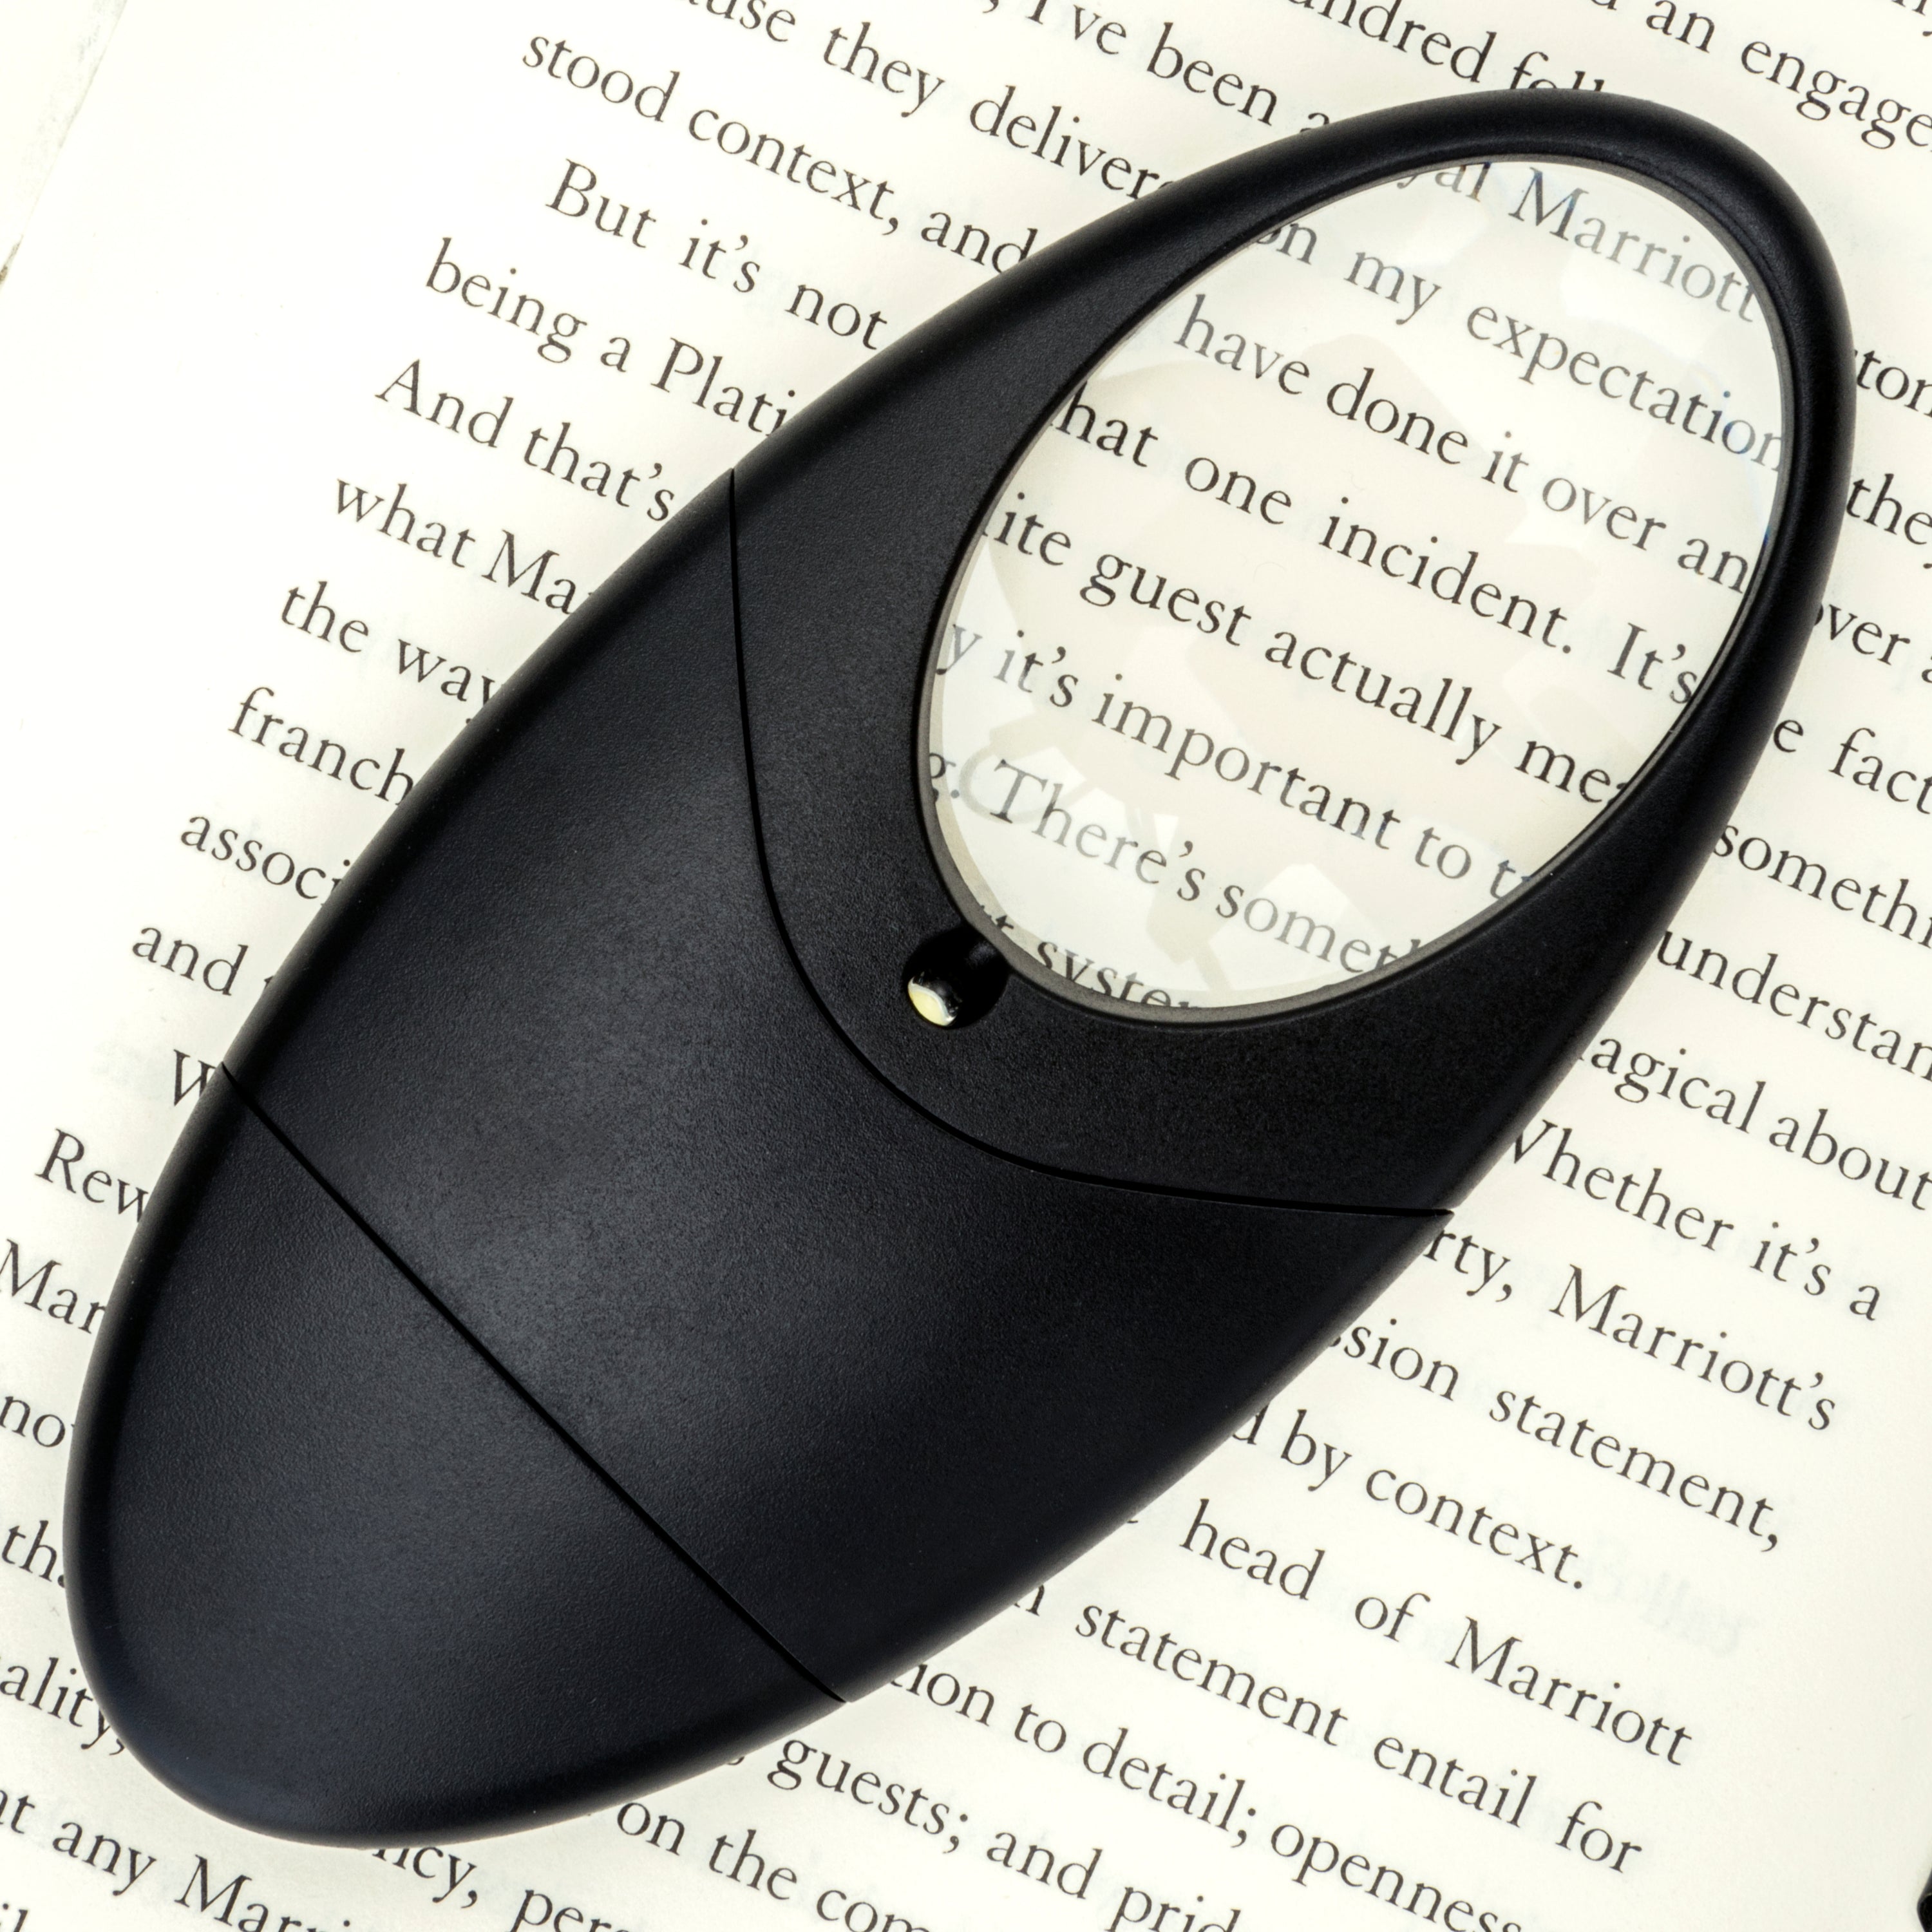 Lighted Oval Travel Magnifier